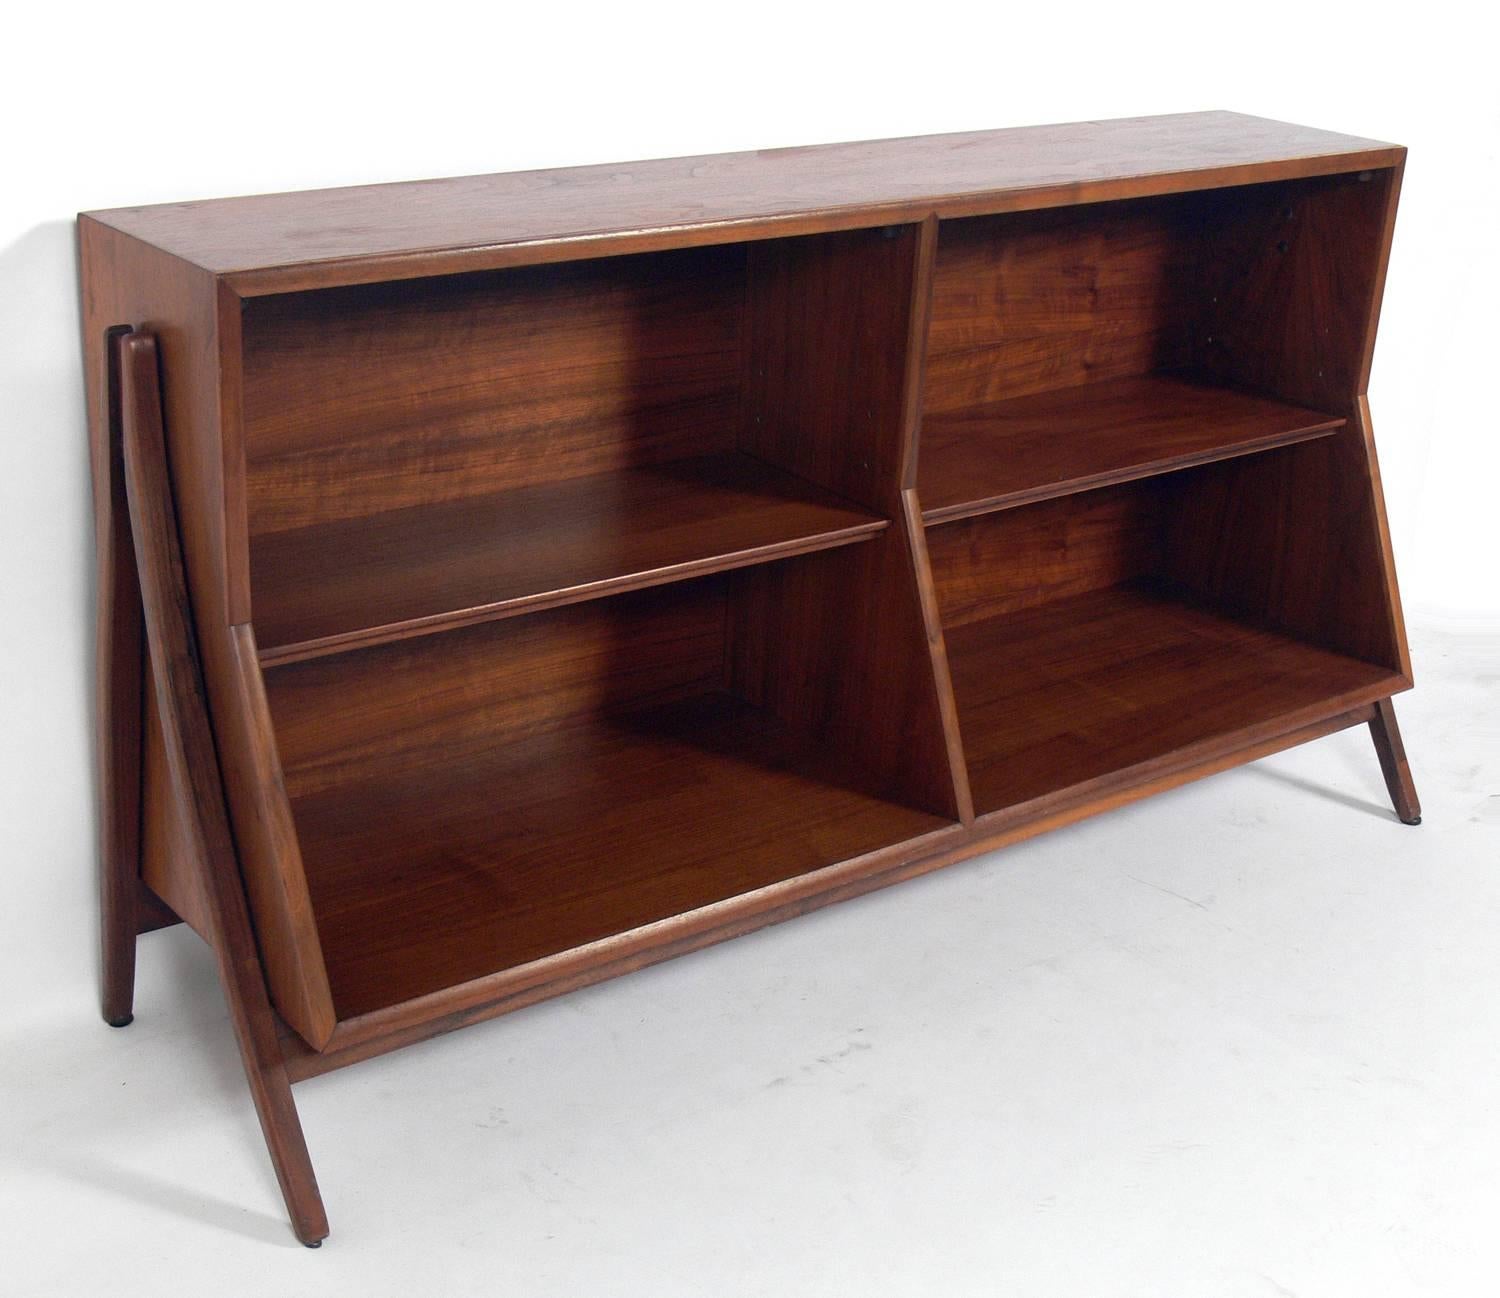 Sculptural bookshelf, designed by Kipp Stewart for Drexel, American, circa 1960s. This piece has a Danish Modern style with elegantly flared legs. It is a versatile size and would work as a bookshelf or case, credenza, vitrine, or bar.